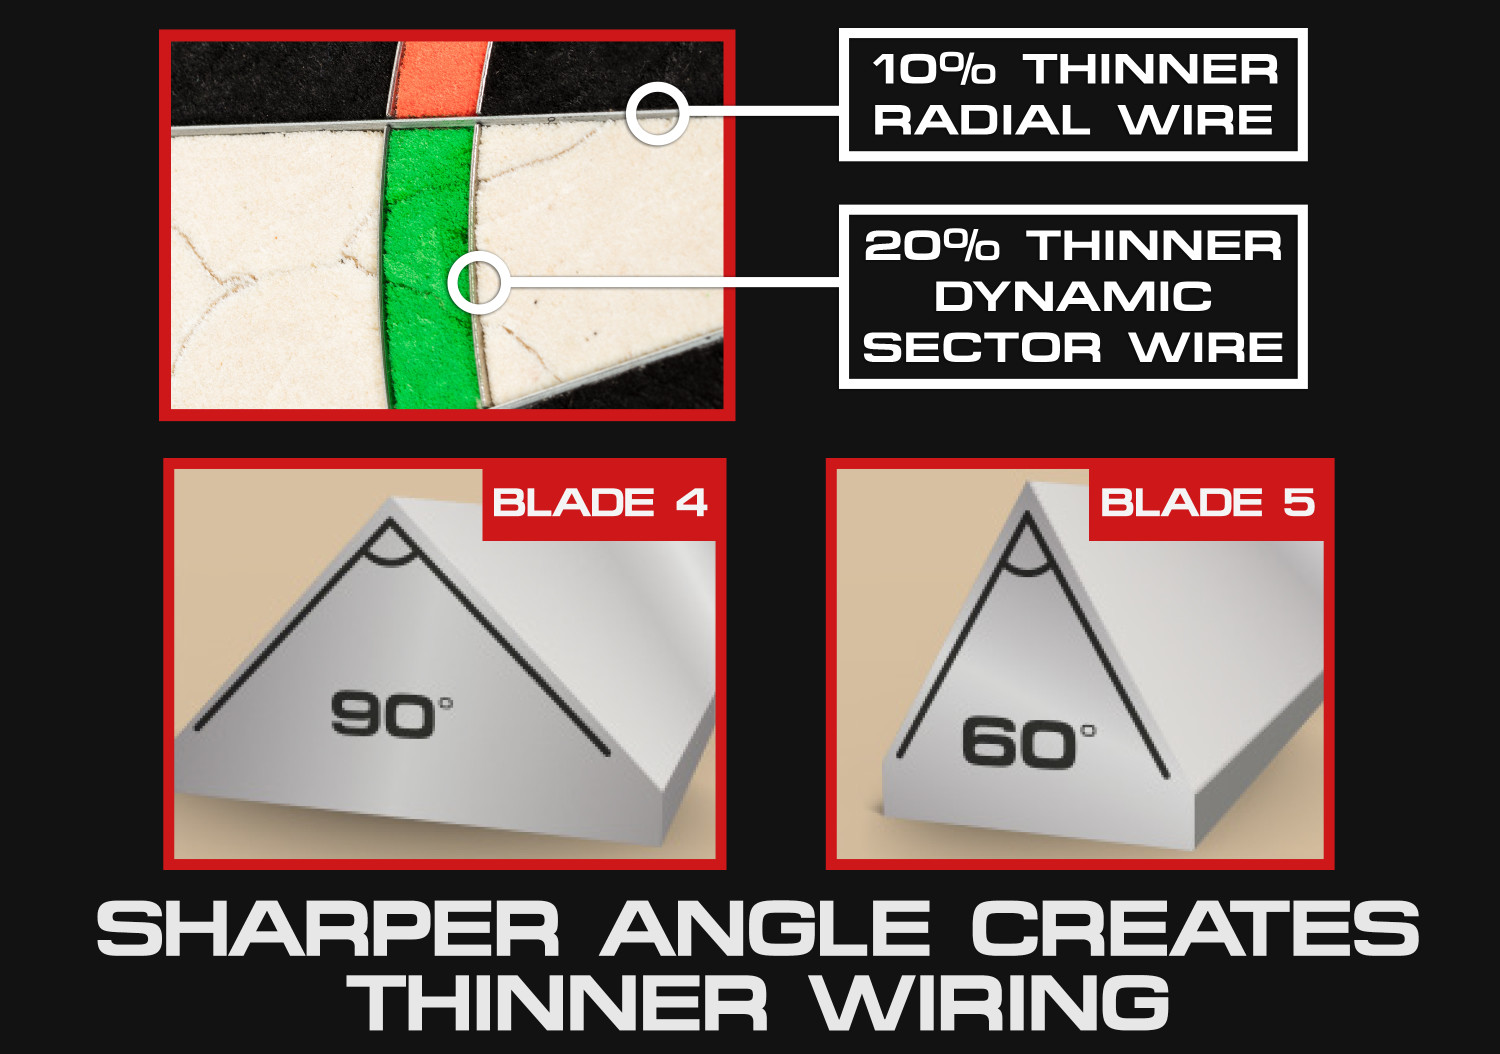 Winmau Darts Blade 5 Bristle Dartboard with All-New Thinner Wiring for Higher Scoring and Reduced Bounce-Outs - image 4 of 10